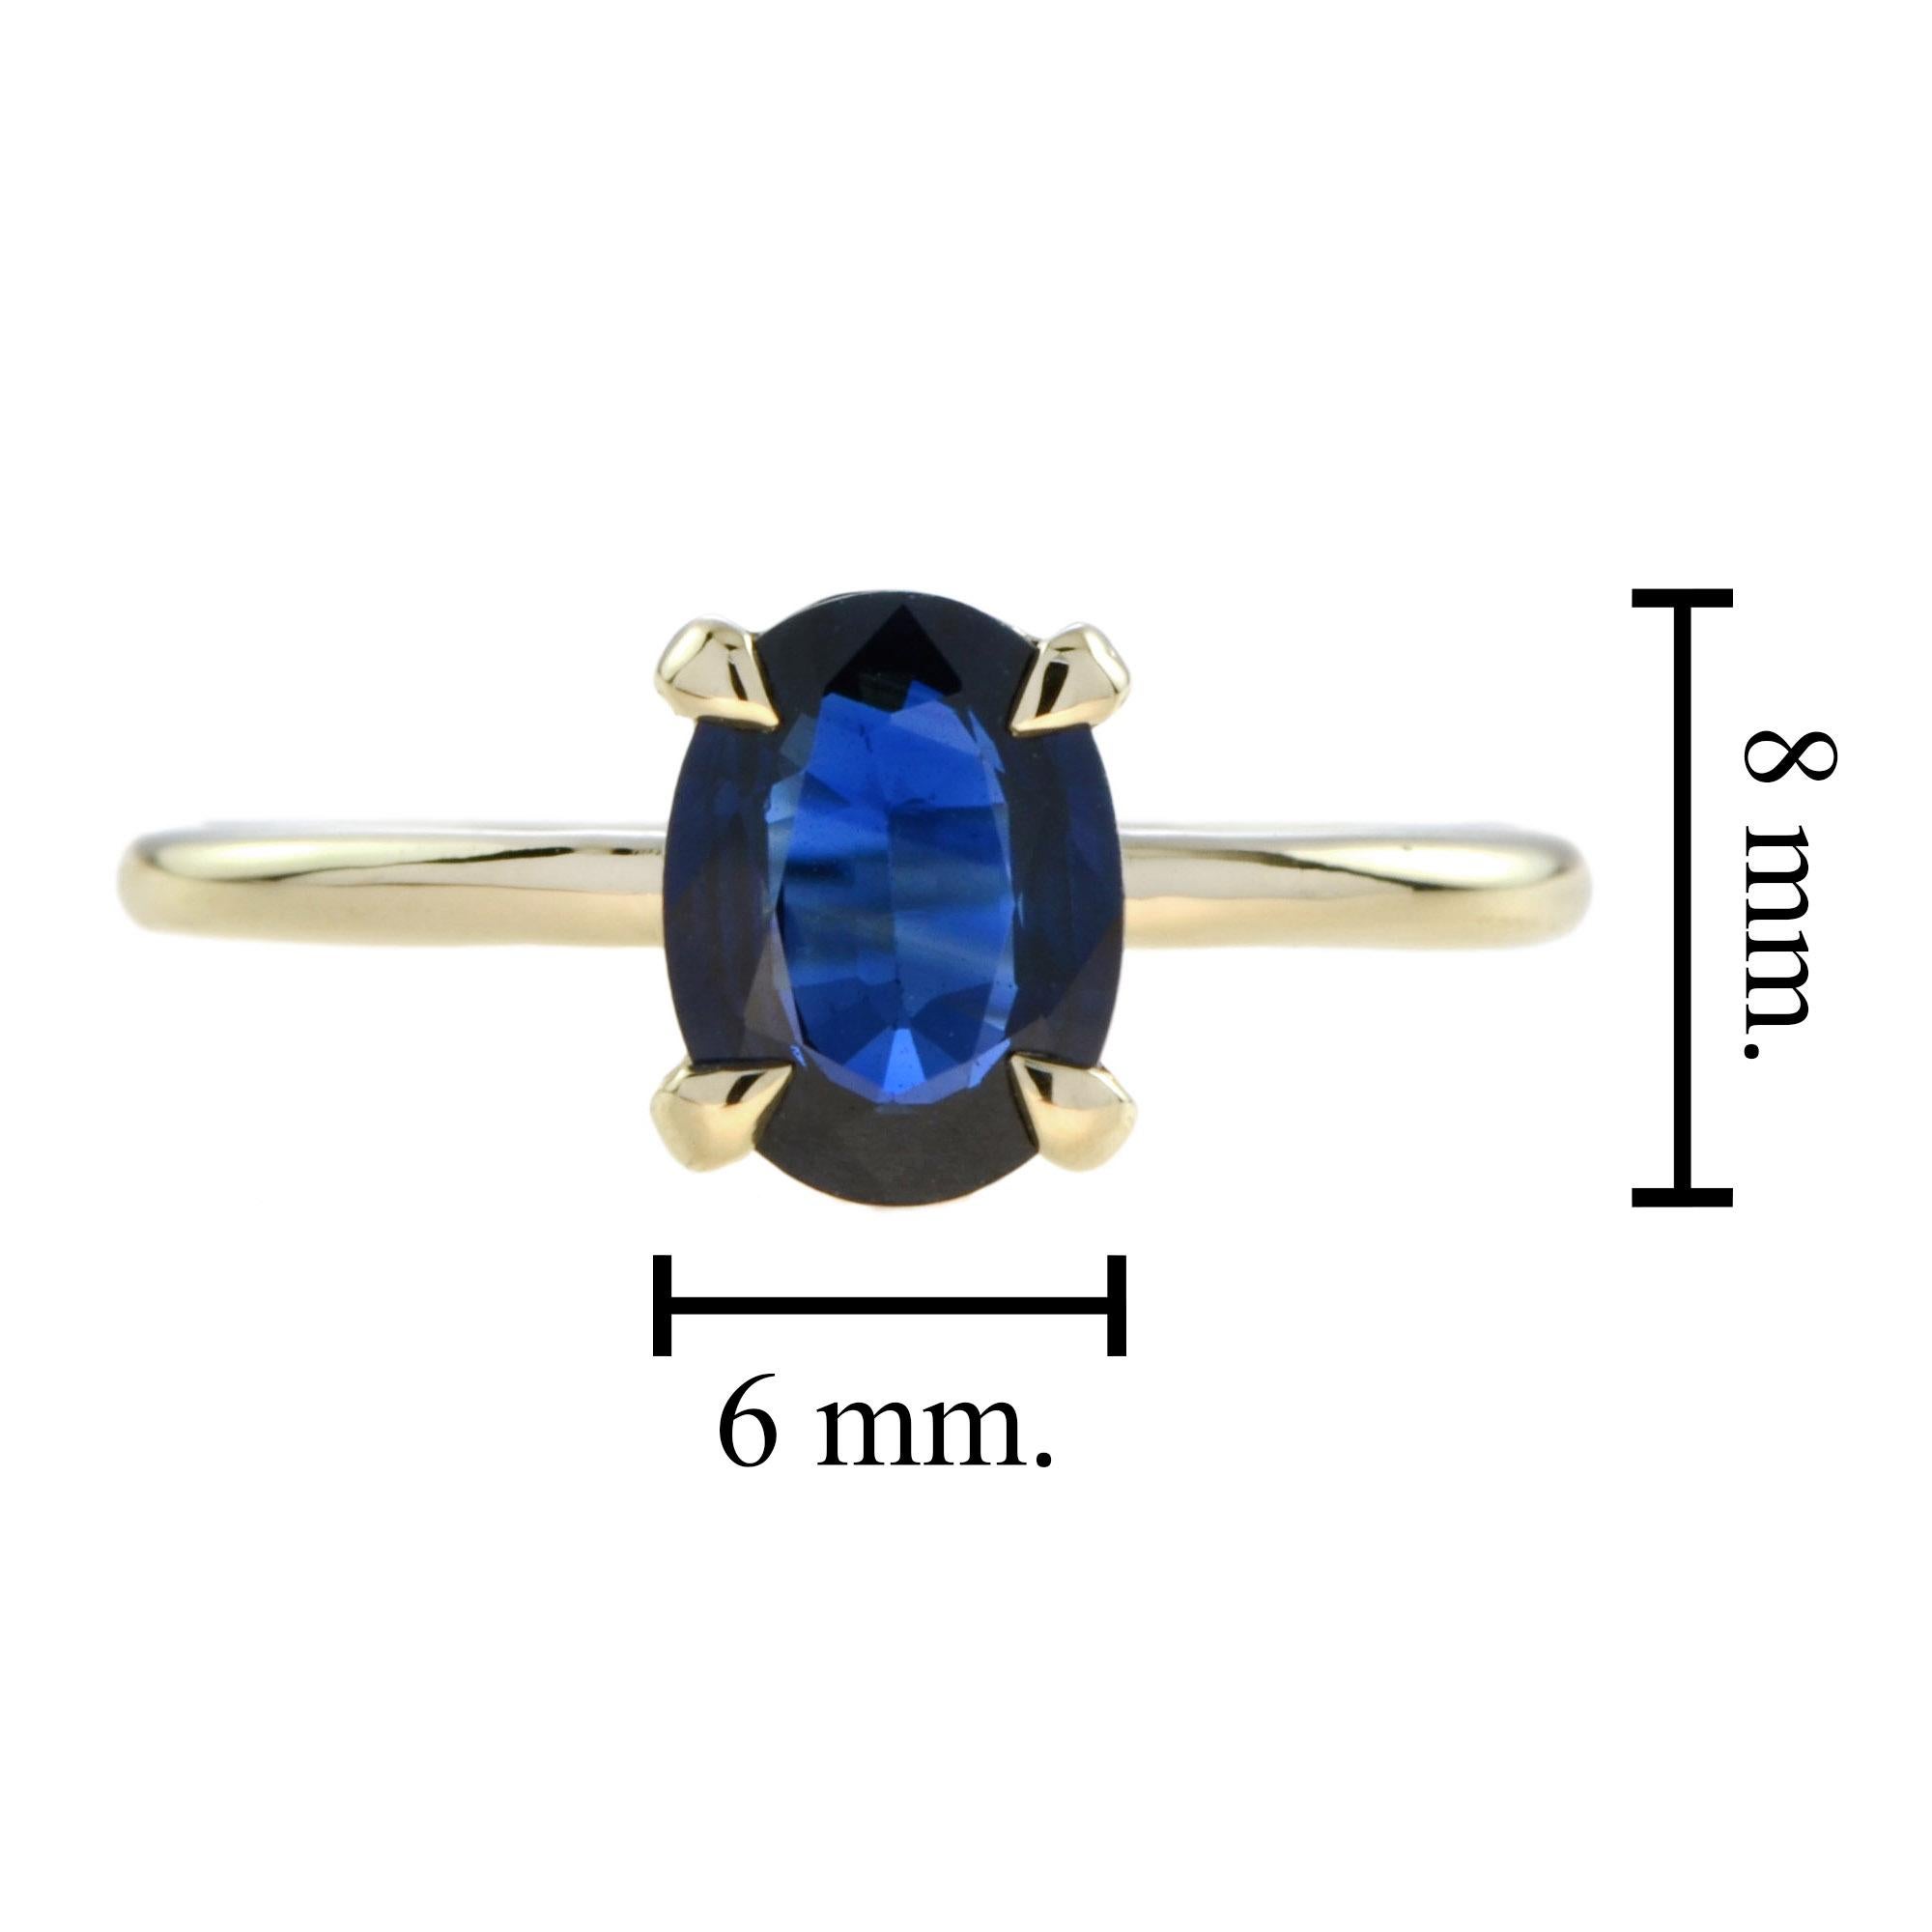 For Sale:  Mia Oval Blue Sapphire Solitaire Ring in 9K Yellow Gold 6